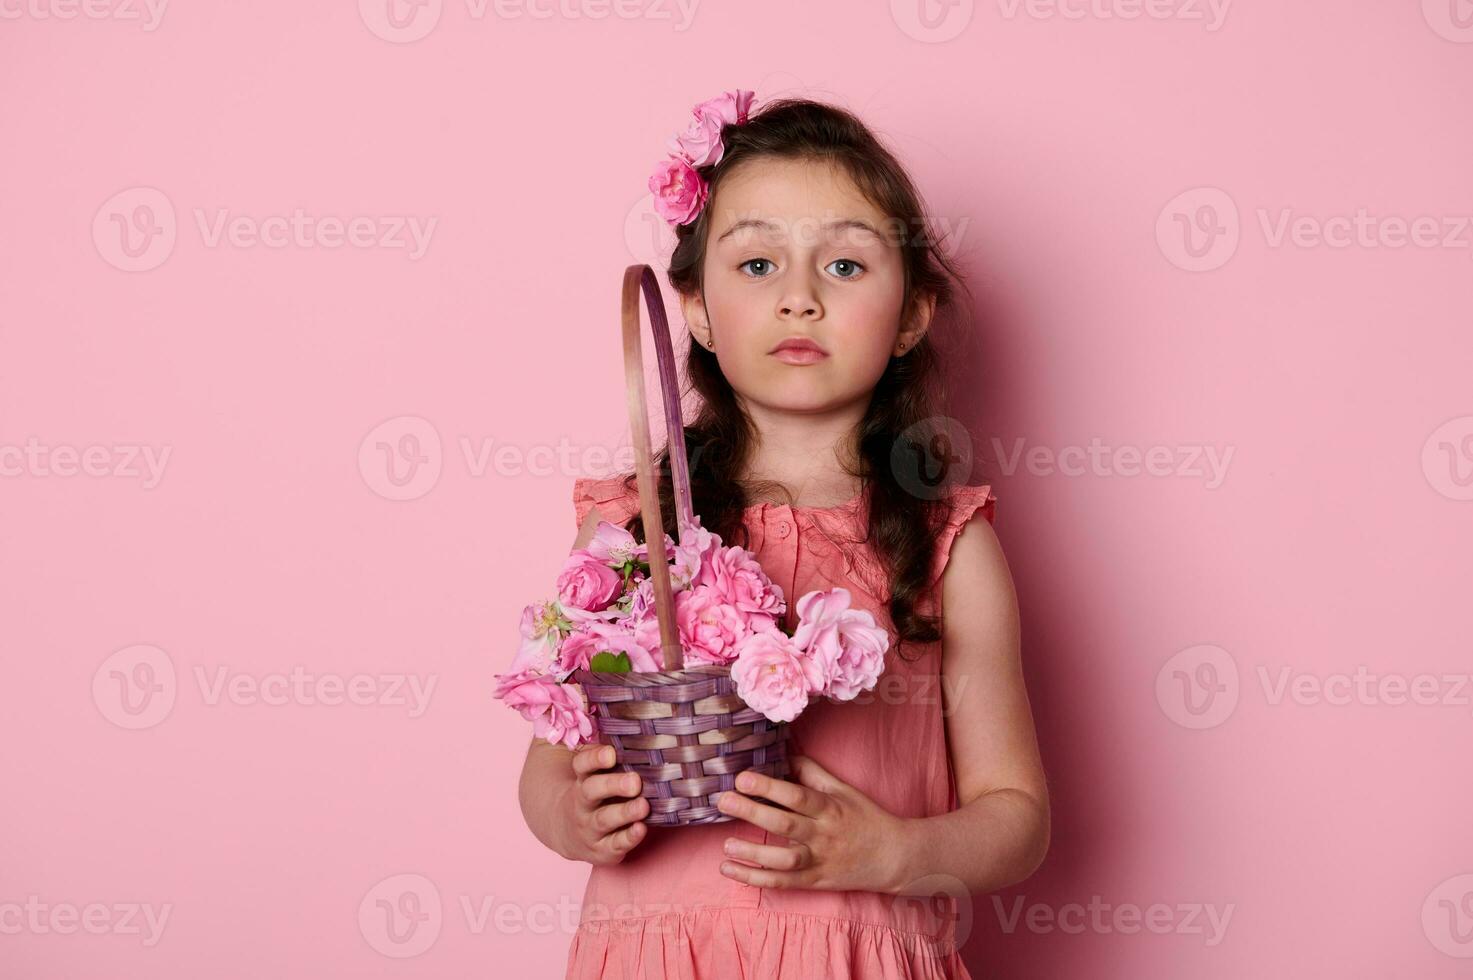 Noble little girl with curly hair and beautiful blue eyes, holding basket of pink roses, looking insightfully at camera photo